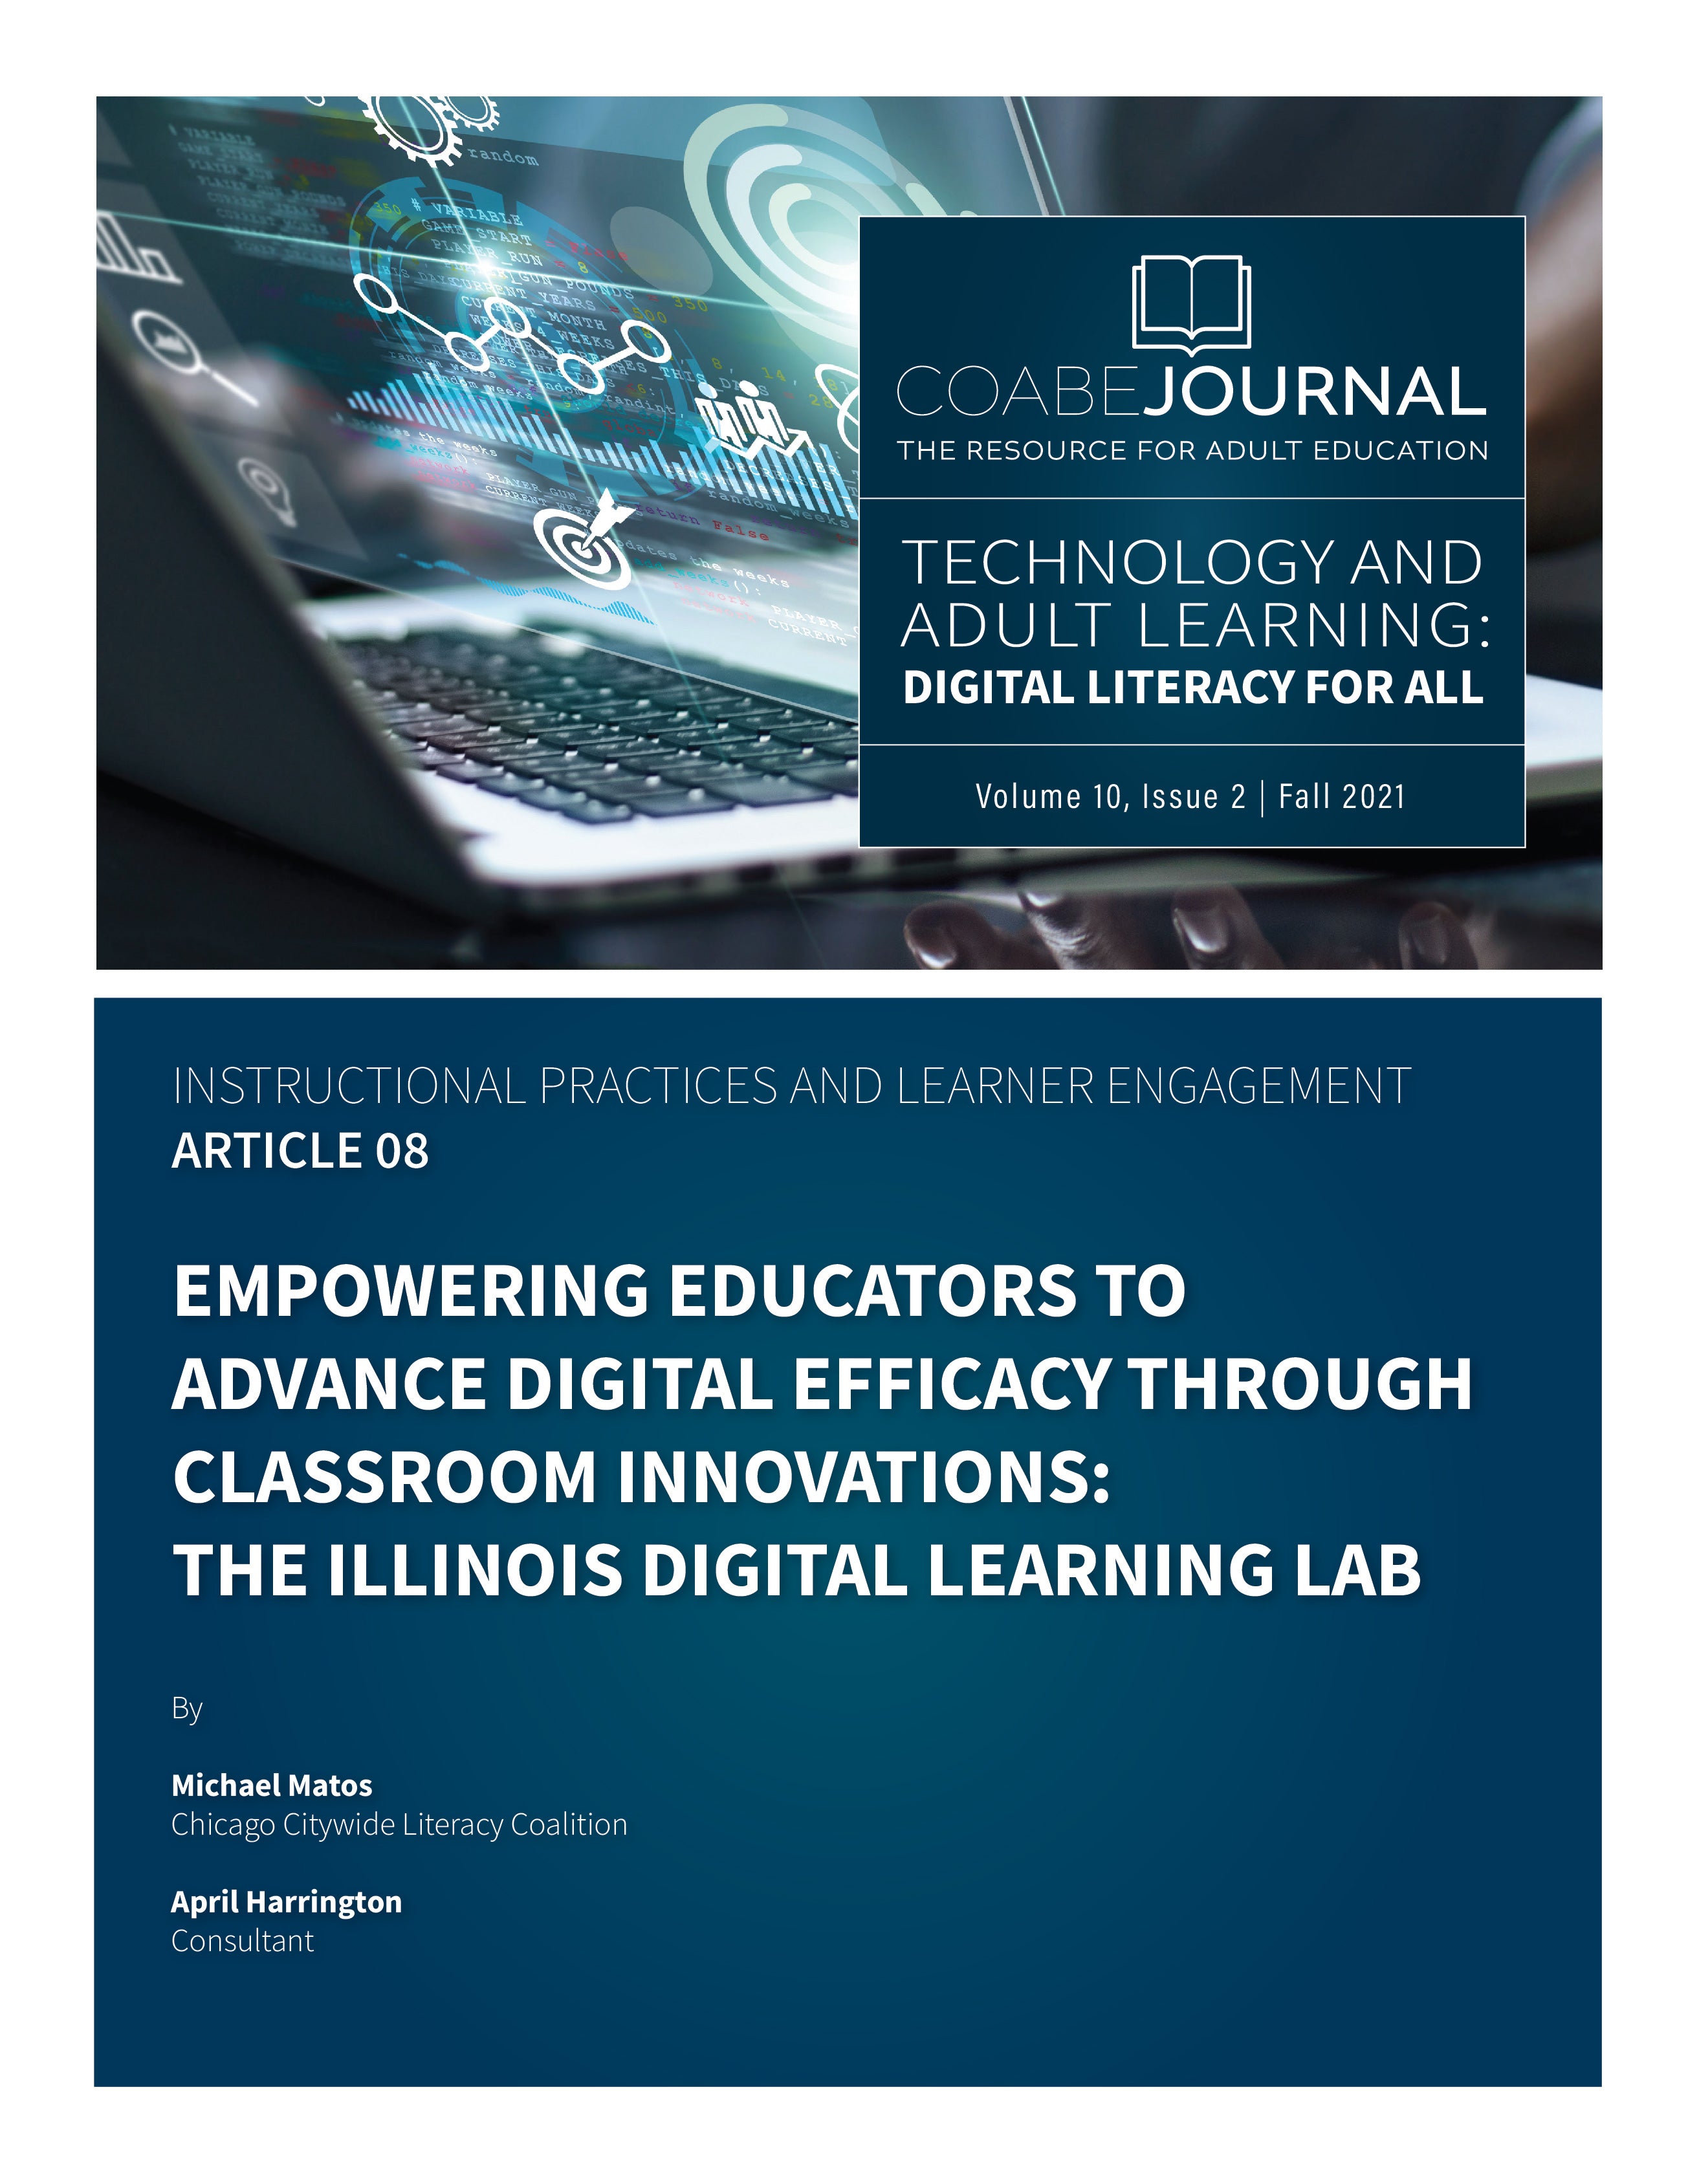 Article 08 | Empowering Educators To Advance Digital Efficacy Through Classroom Innovations: The Illinois Digital Learning Lab